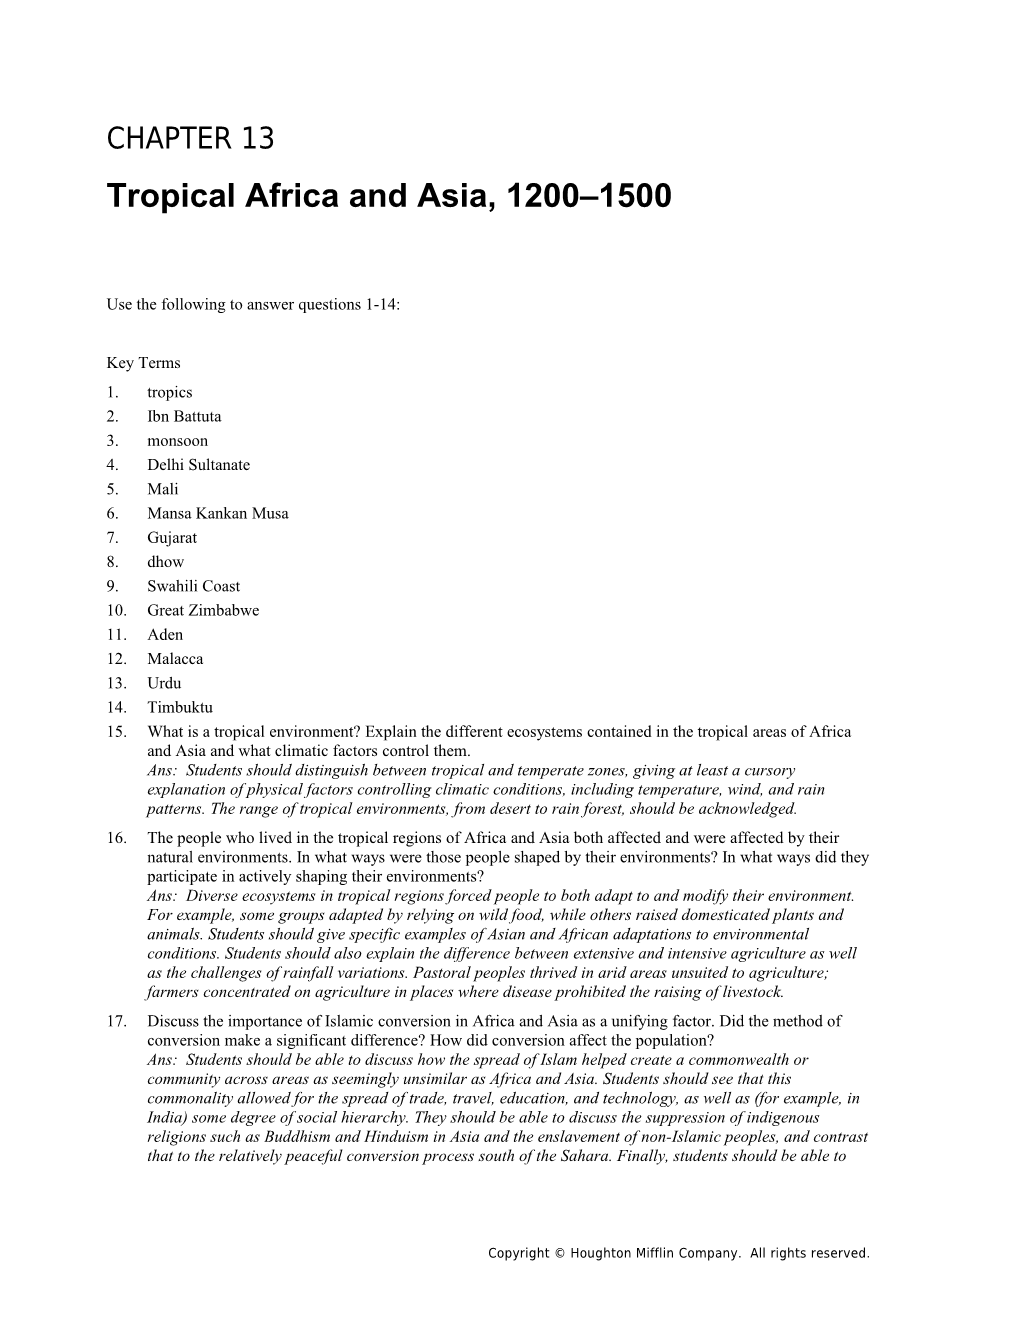 Chapter 13: Tropical Africa and Asia, 1200 1500 1